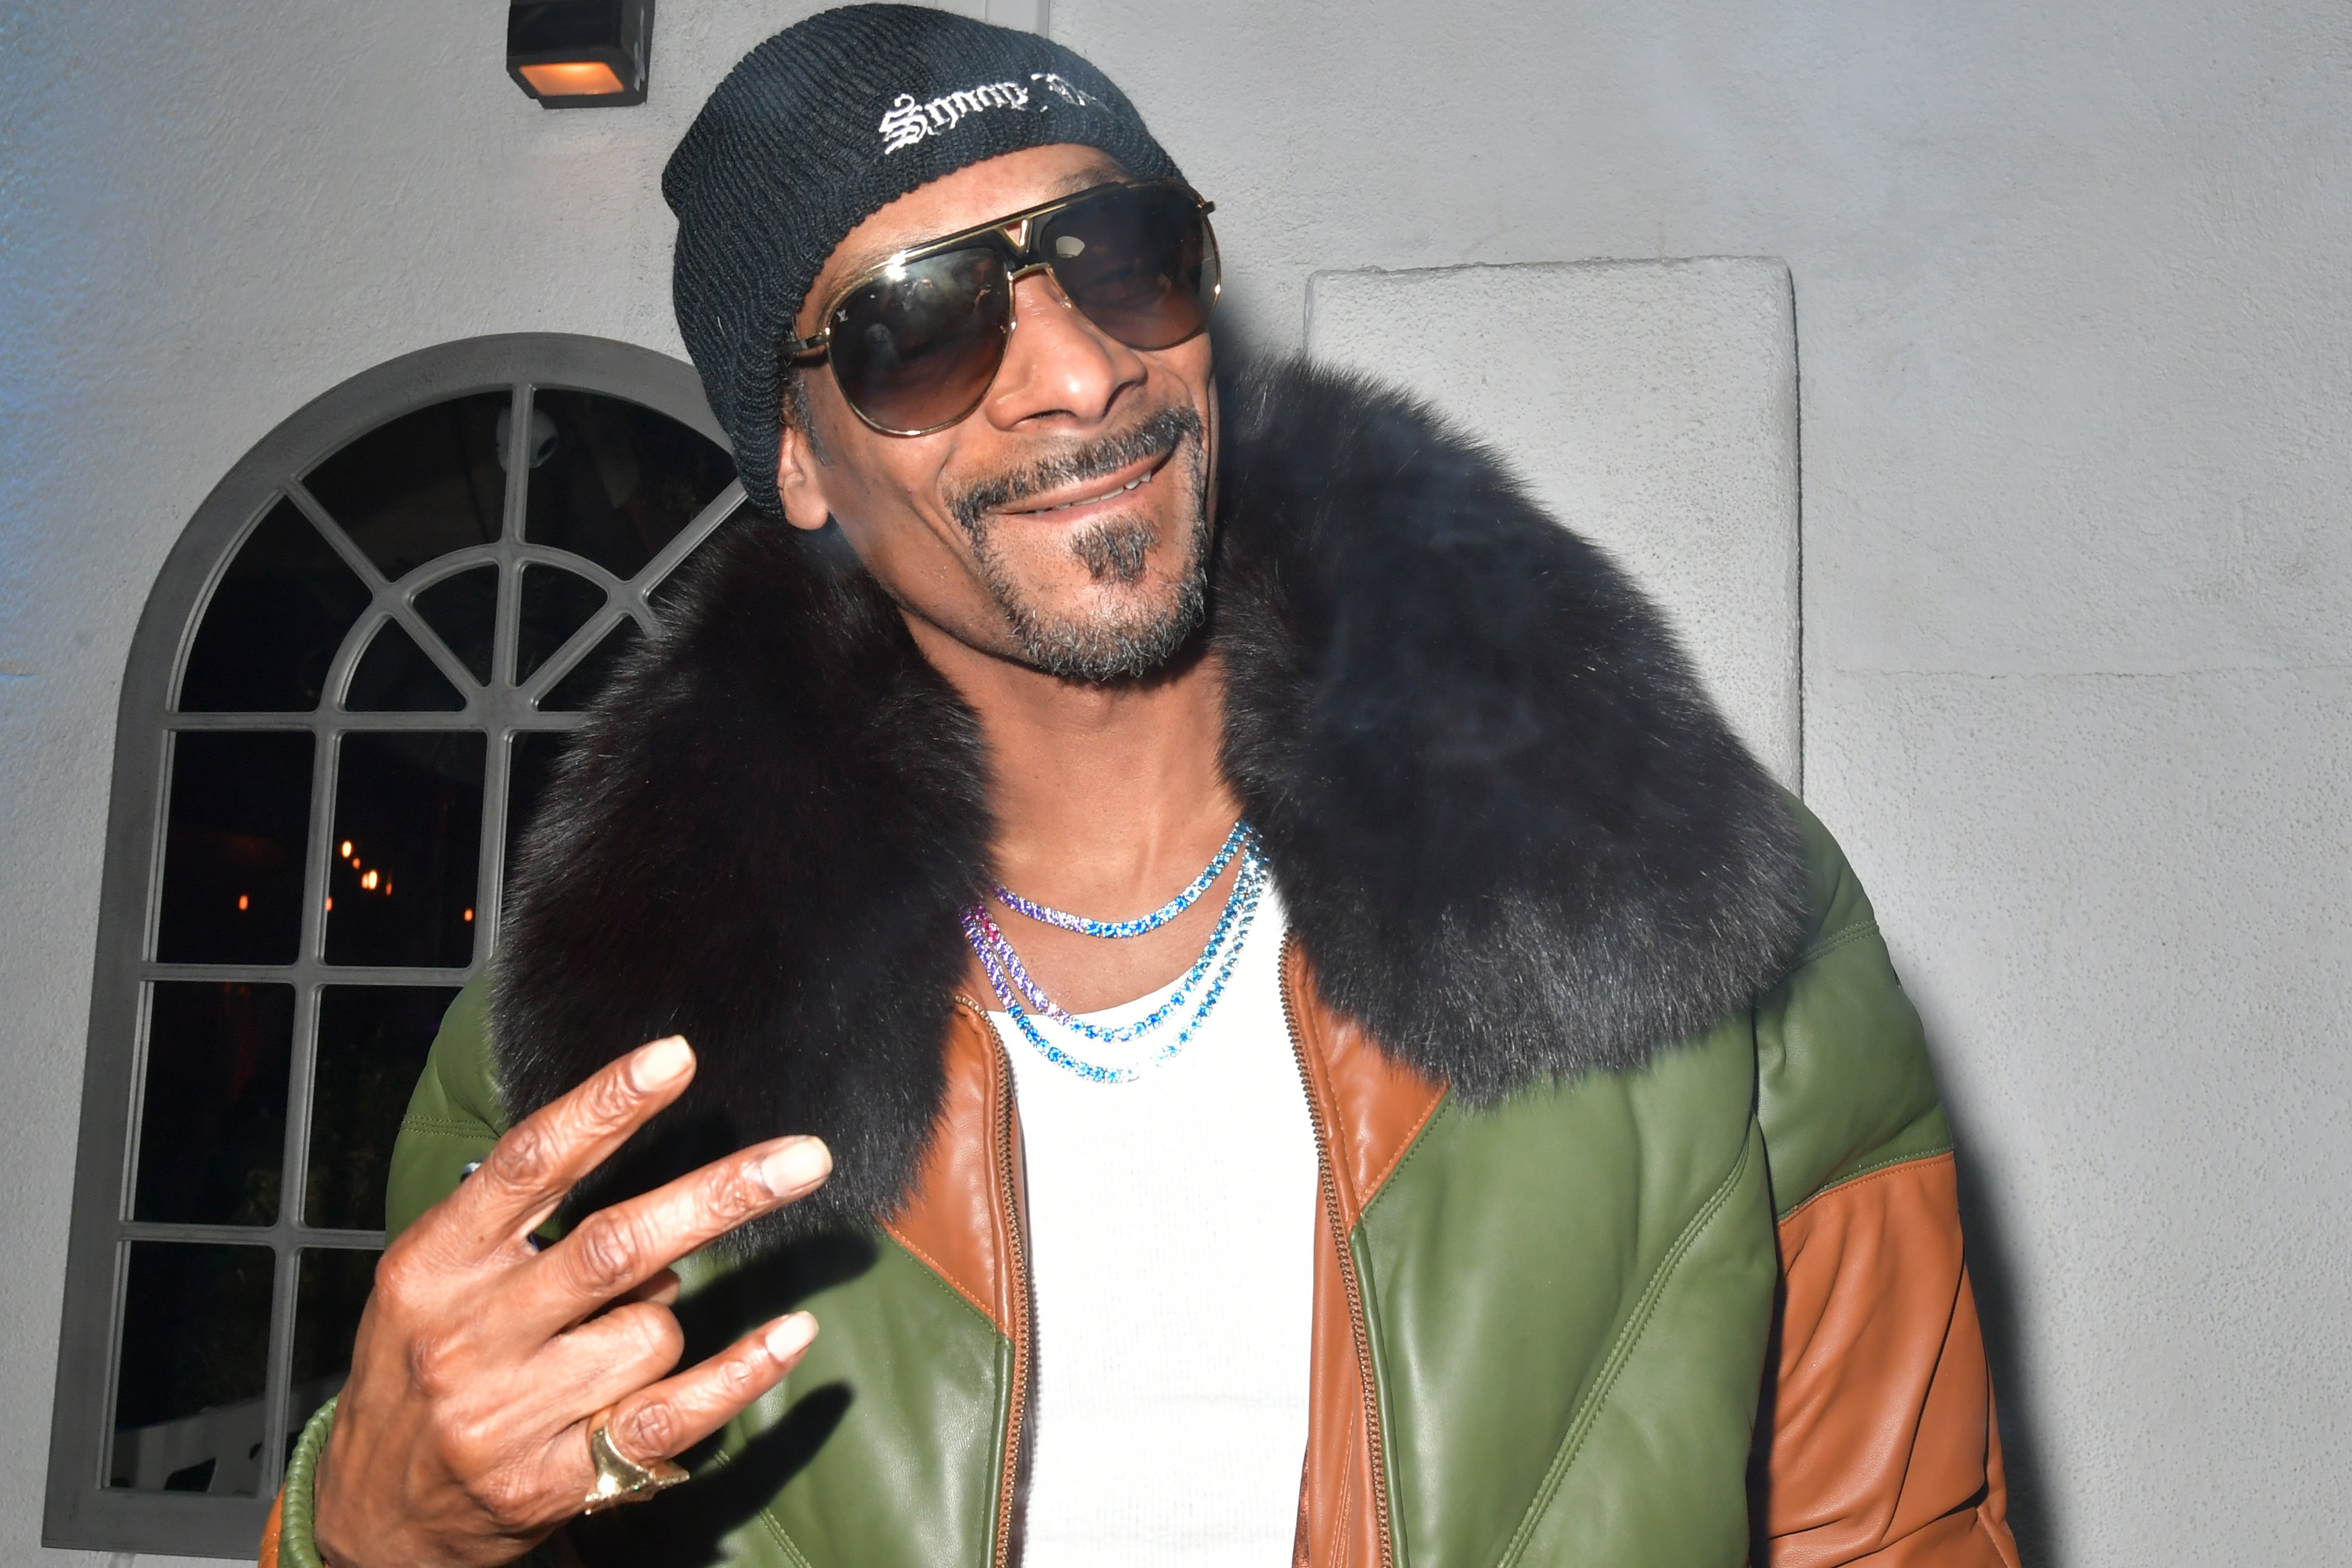 Snoop Dogg attends the after party of Neon And Vice Studio's "The Beach Bum" at ArcLight Hollywood on March 28, 2019 | Photo: GettyImages